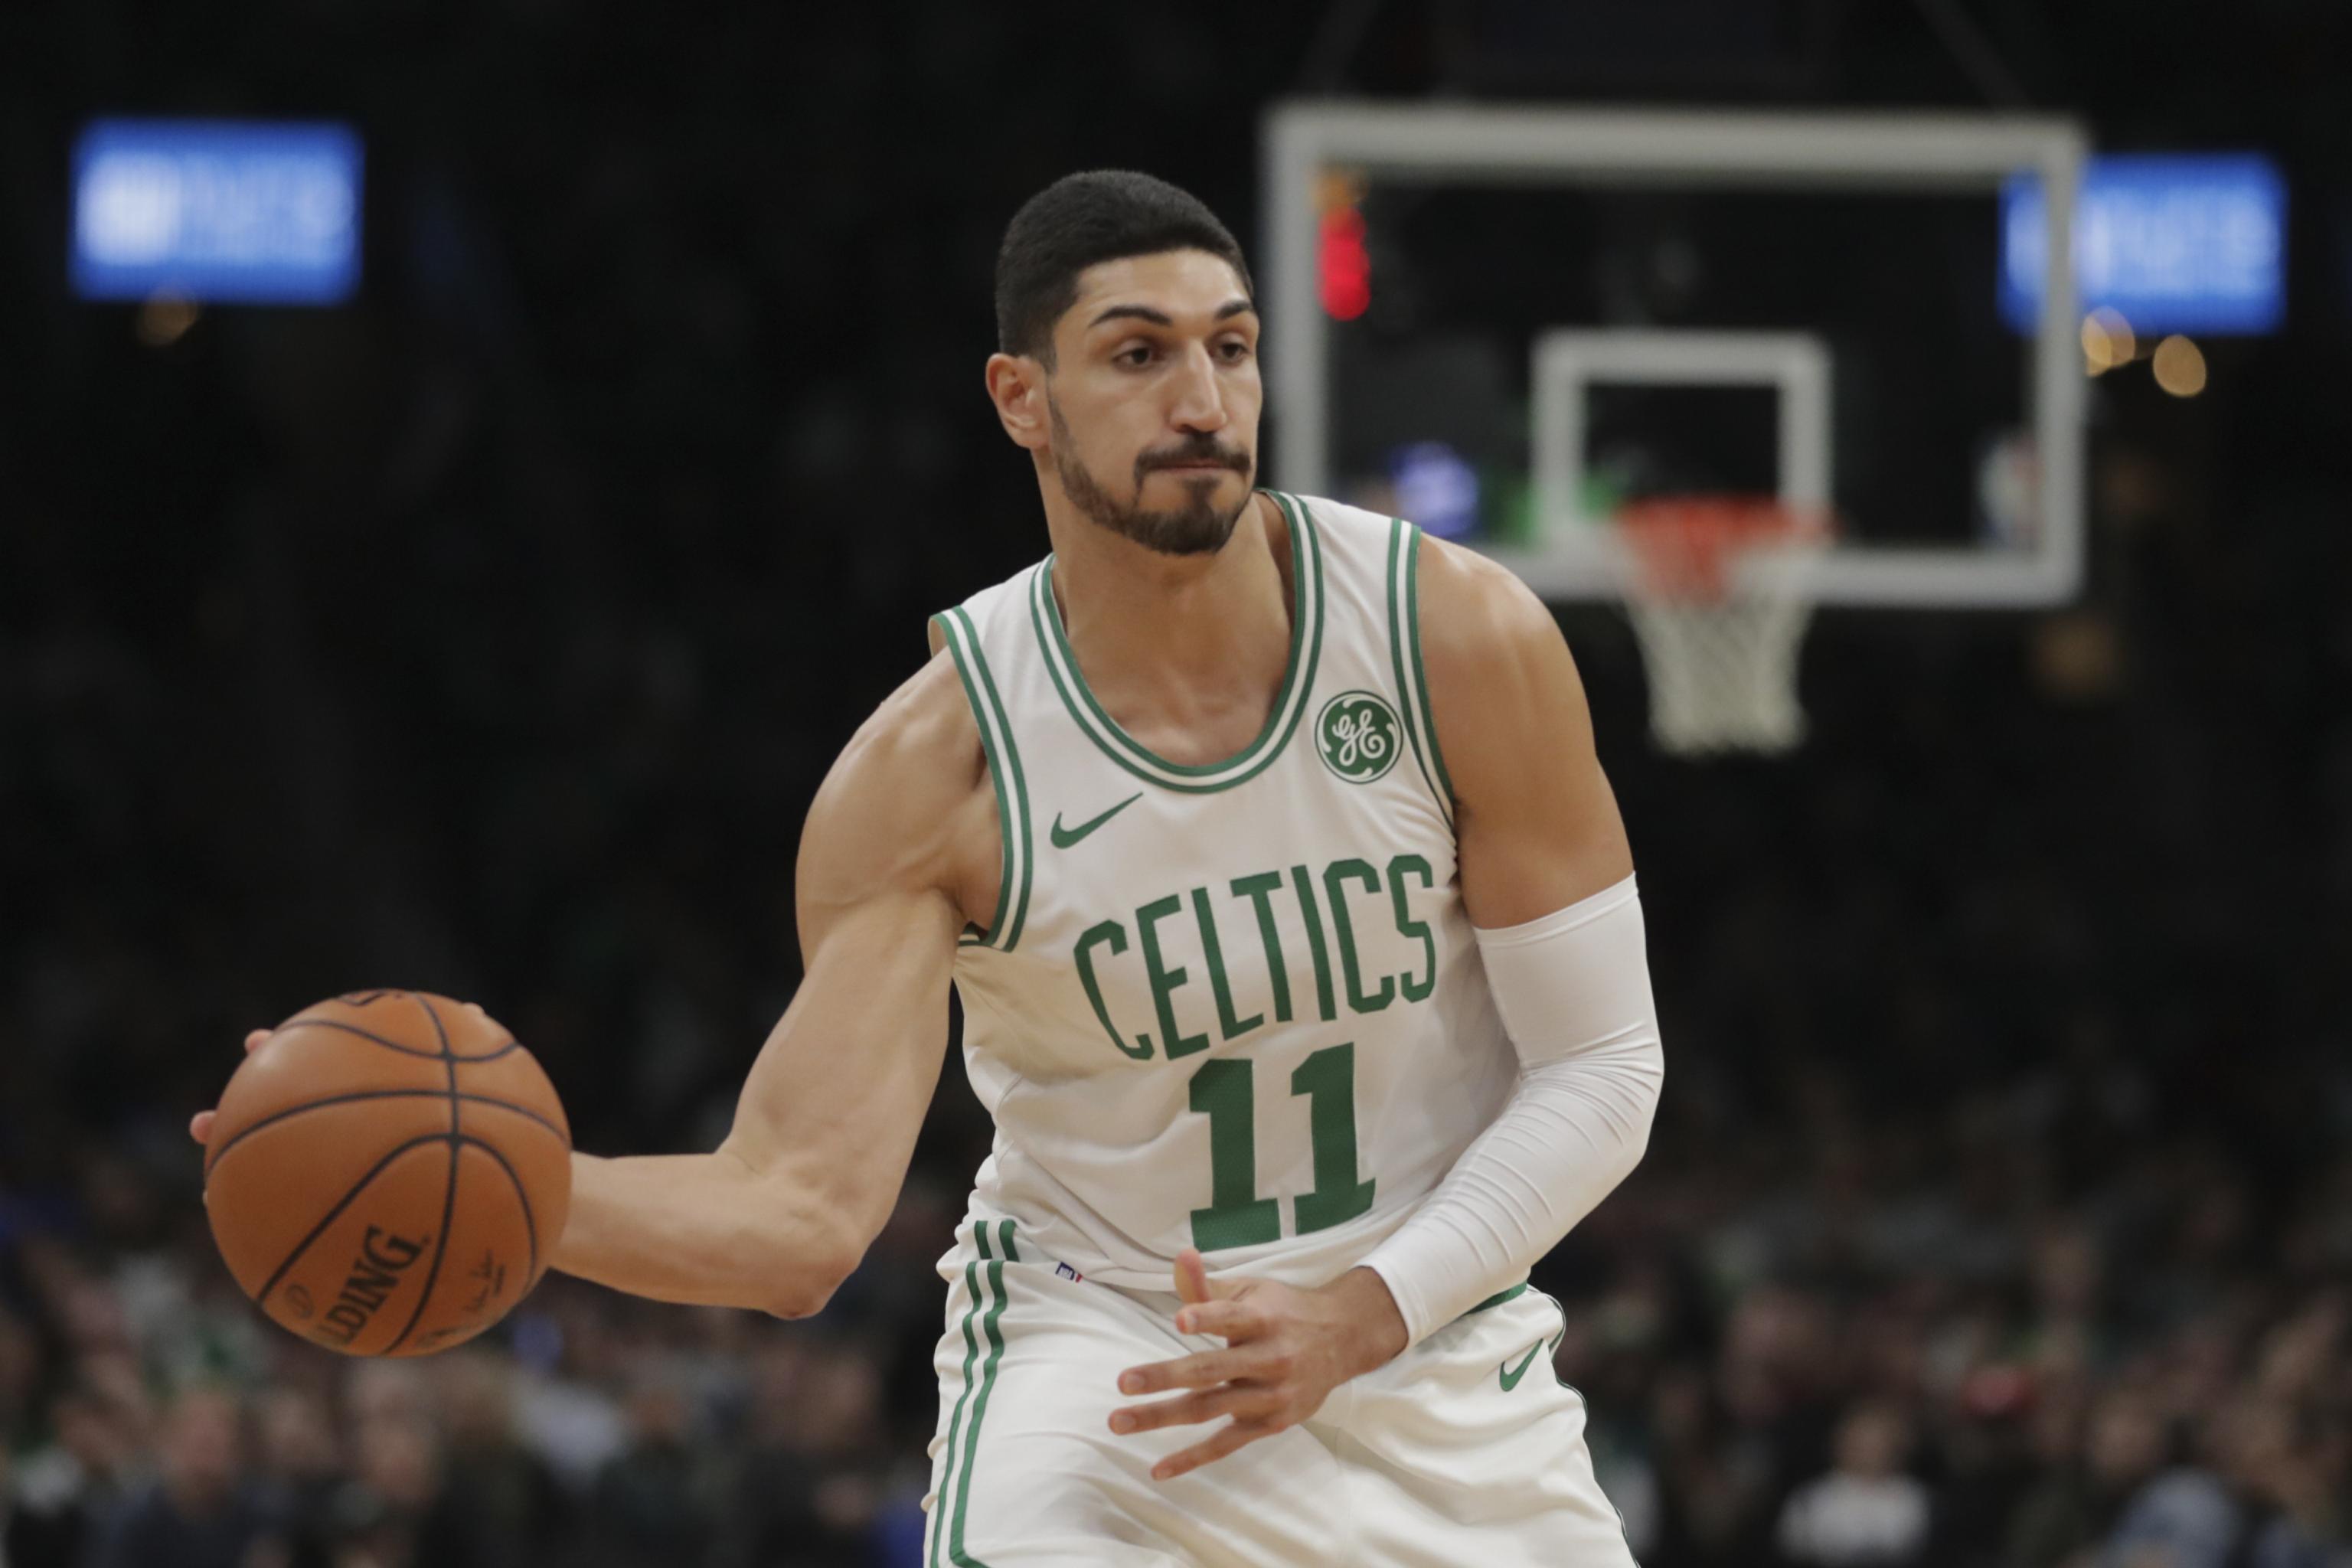 Celtics' Enes Kanter's lack of playing time is 'strictly based on